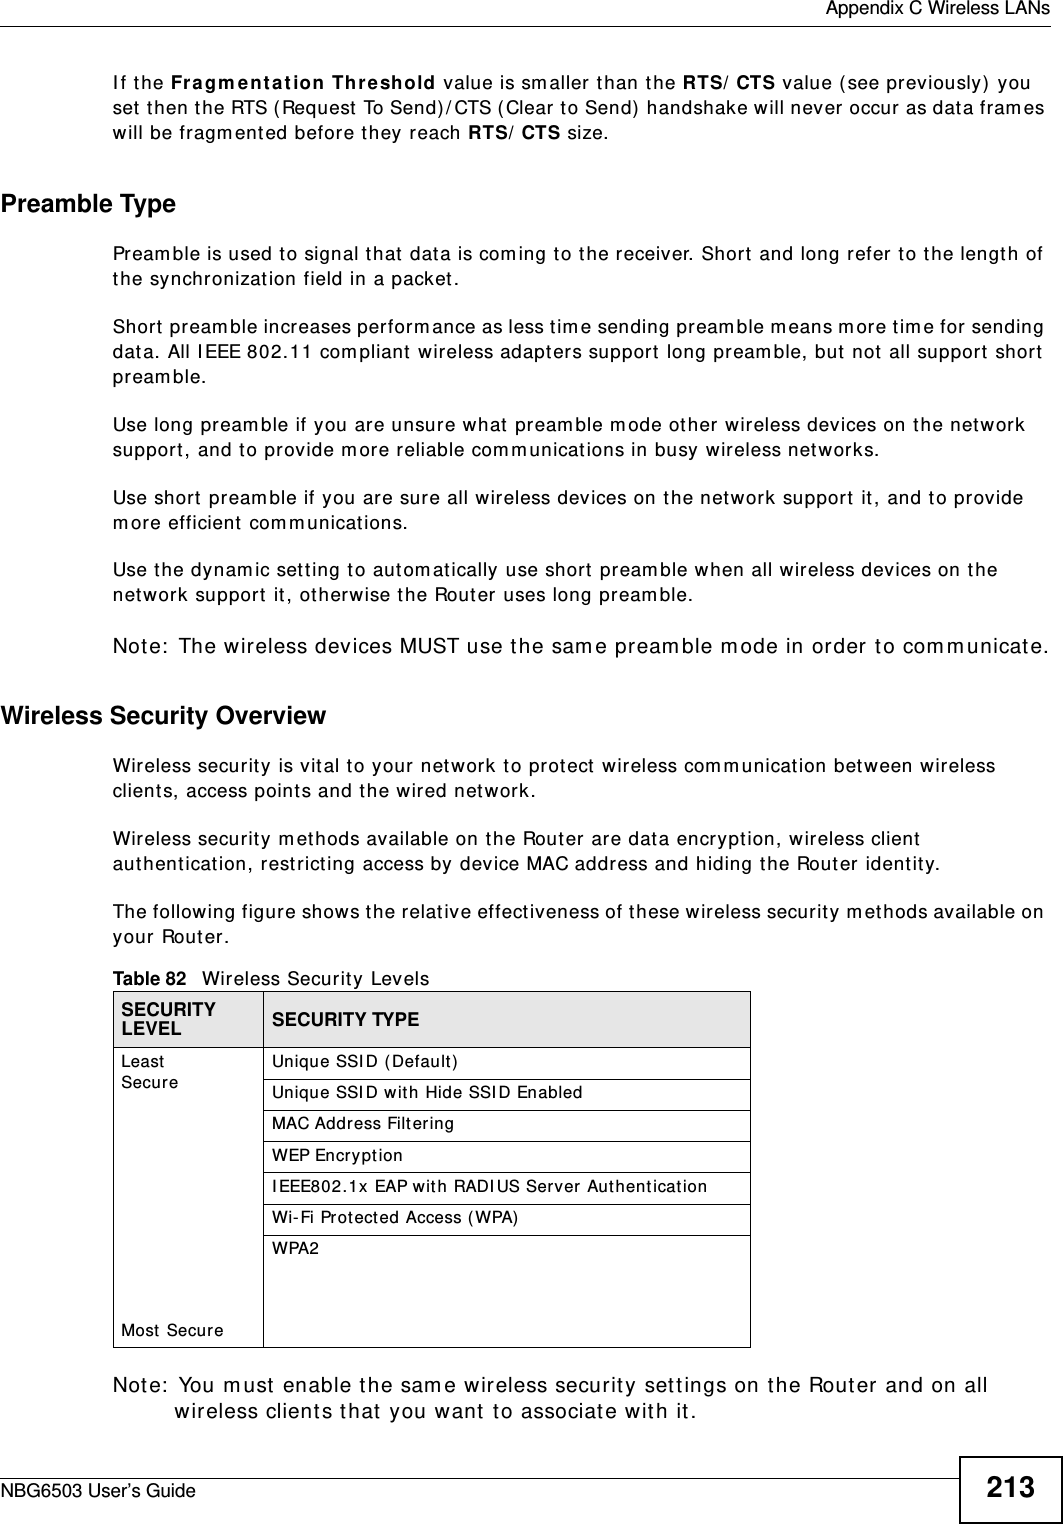  Appendix C Wireless LANsNBG6503 User’s Guide 213If the Fragmentation Threshold value is smaller than the RTS/CTS value (see previously) you set then the RTS (Request To Send)/CTS (Clear to Send) handshake will never occur as data frames will be fragmented before they reach RTS/CTS size.Preamble TypePreamble is used to signal that data is coming to the receiver. Short and long refer to the length of the synchronization field in a packet.Short preamble increases performance as less time sending preamble means more time for sending data. All IEEE 802.11 compliant wireless adapters support long preamble, but not all support short preamble. Use long preamble if you are unsure what preamble mode other wireless devices on the network support, and to provide more reliable communications in busy wireless networks. Use short preamble if you are sure all wireless devices on the network support it, and to provide more efficient communications.Use the dynamic setting to automatically use short preamble when all wireless devices on the network support it, otherwise the Router uses long preamble.Note: The wireless devices MUST use the same preamble mode in order to communicate.Wireless Security OverviewWireless security is vital to your network to protect wireless communication between wireless clients, access points and the wired network.Wireless security methods available on the Router are data encryption, wireless client authentication, restricting access by device MAC address and hiding the Router identity.The following figure shows the relative effectiveness of these wireless security methods available on your Router.Note: You must enable the same wireless security settings on the Router and on all wireless clients that you want to associate with it. Table 82   Wireless Security LevelsSECURITY LEVEL SECURITY TYPELeast       Secure                                                                                  Most SecureUnique SSID (Default)Unique SSID with Hide SSID EnabledMAC Address FilteringWEP EncryptionIEEE802.1x EAP with RADIUS Server AuthenticationWi-Fi Protected Access (WPA)WPA2